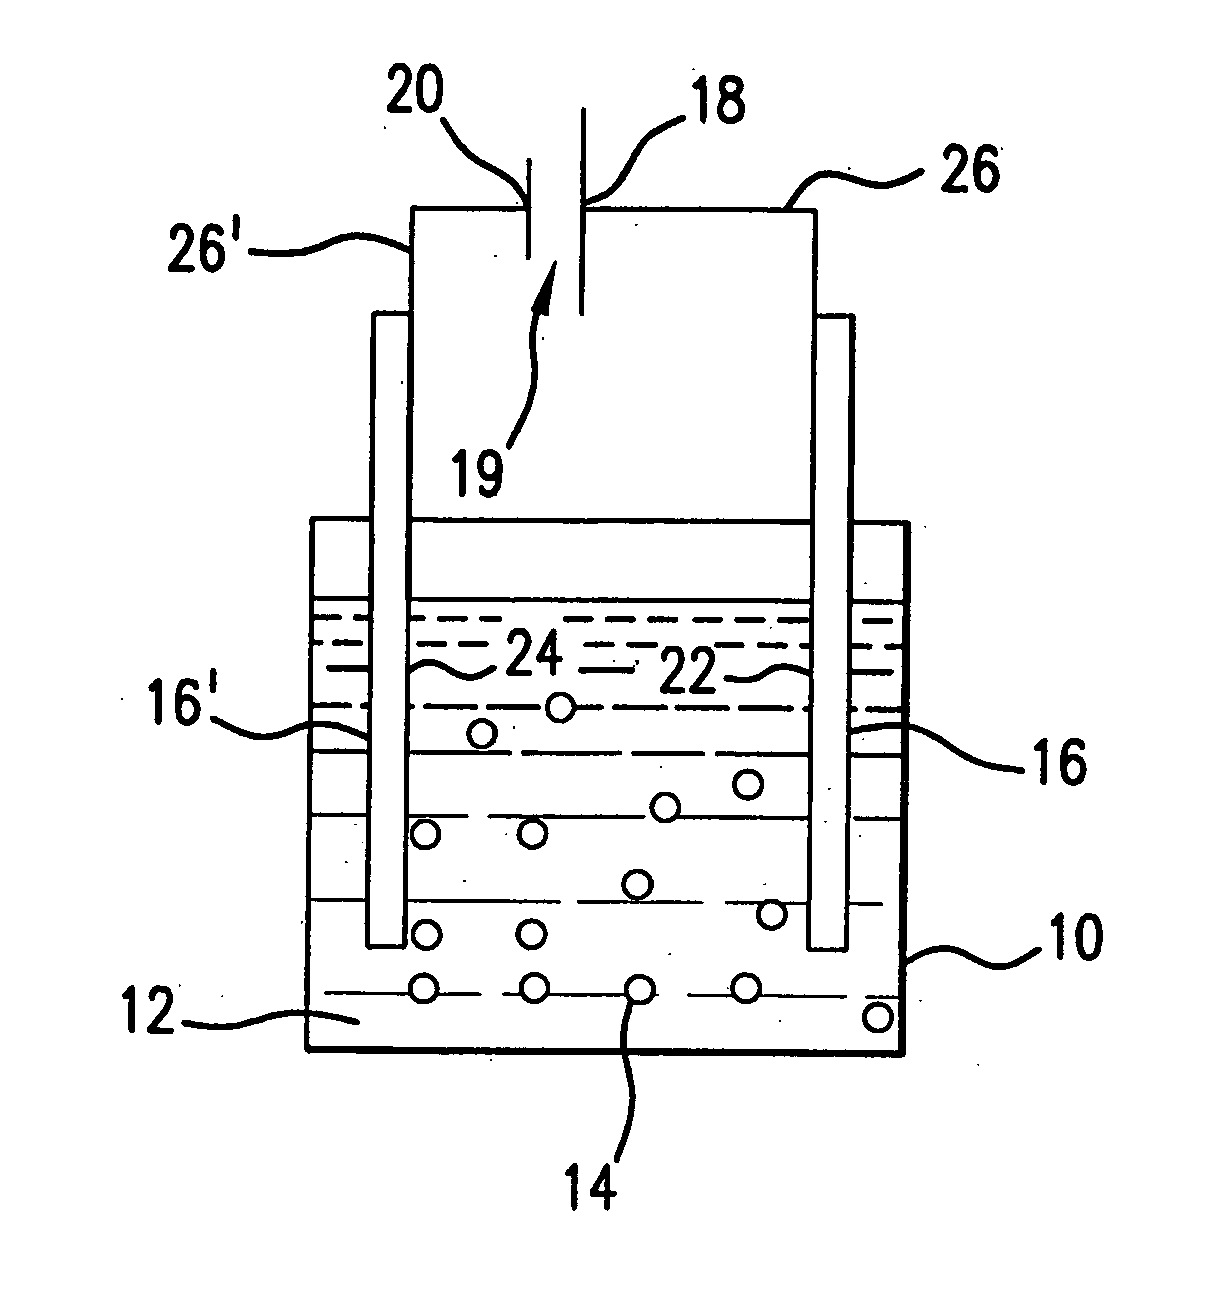 Method of electric field assisted deposition of films of nanoparticles